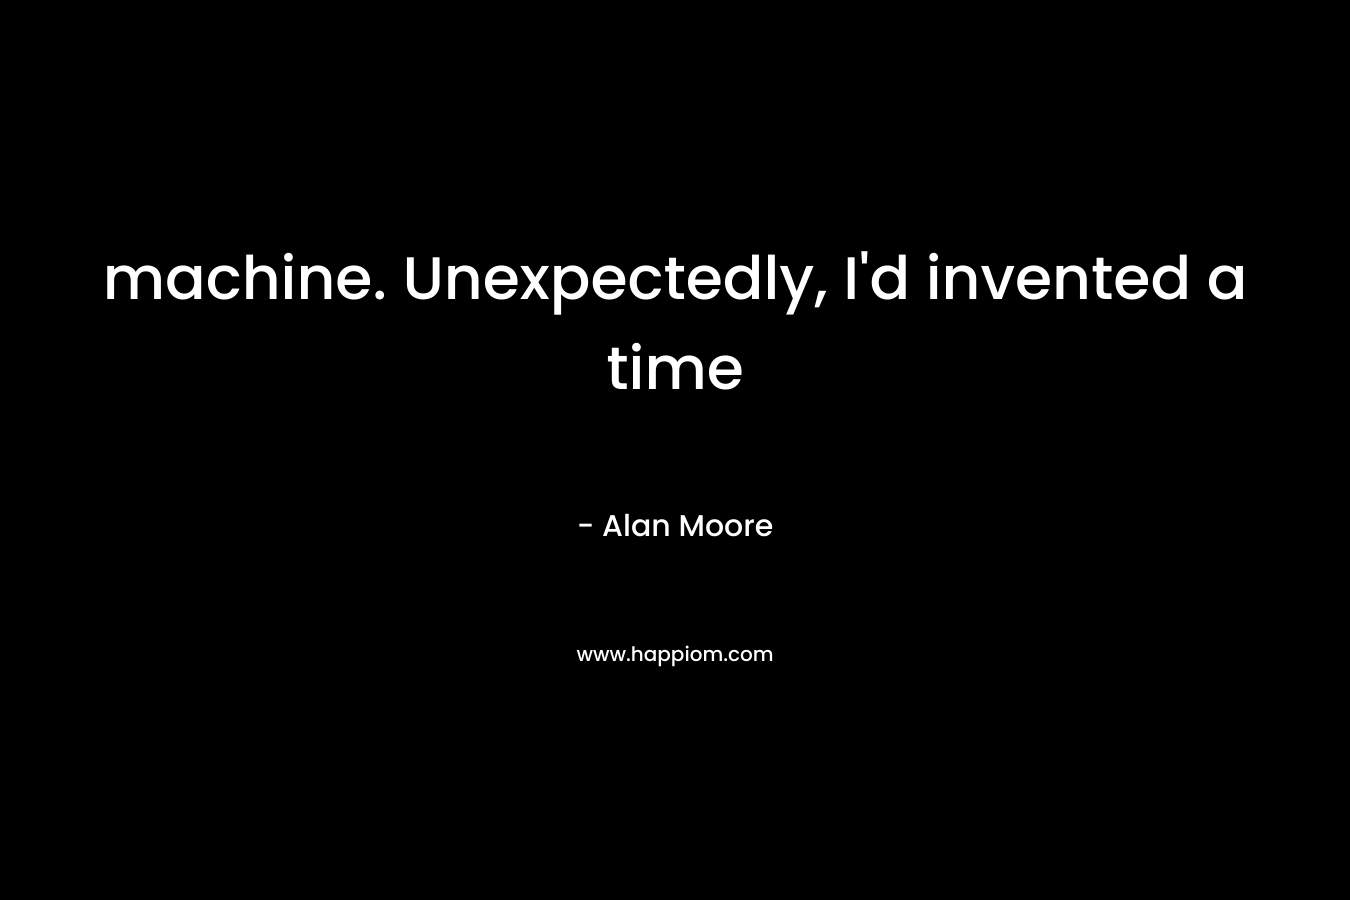 machine. Unexpectedly, I'd invented a time